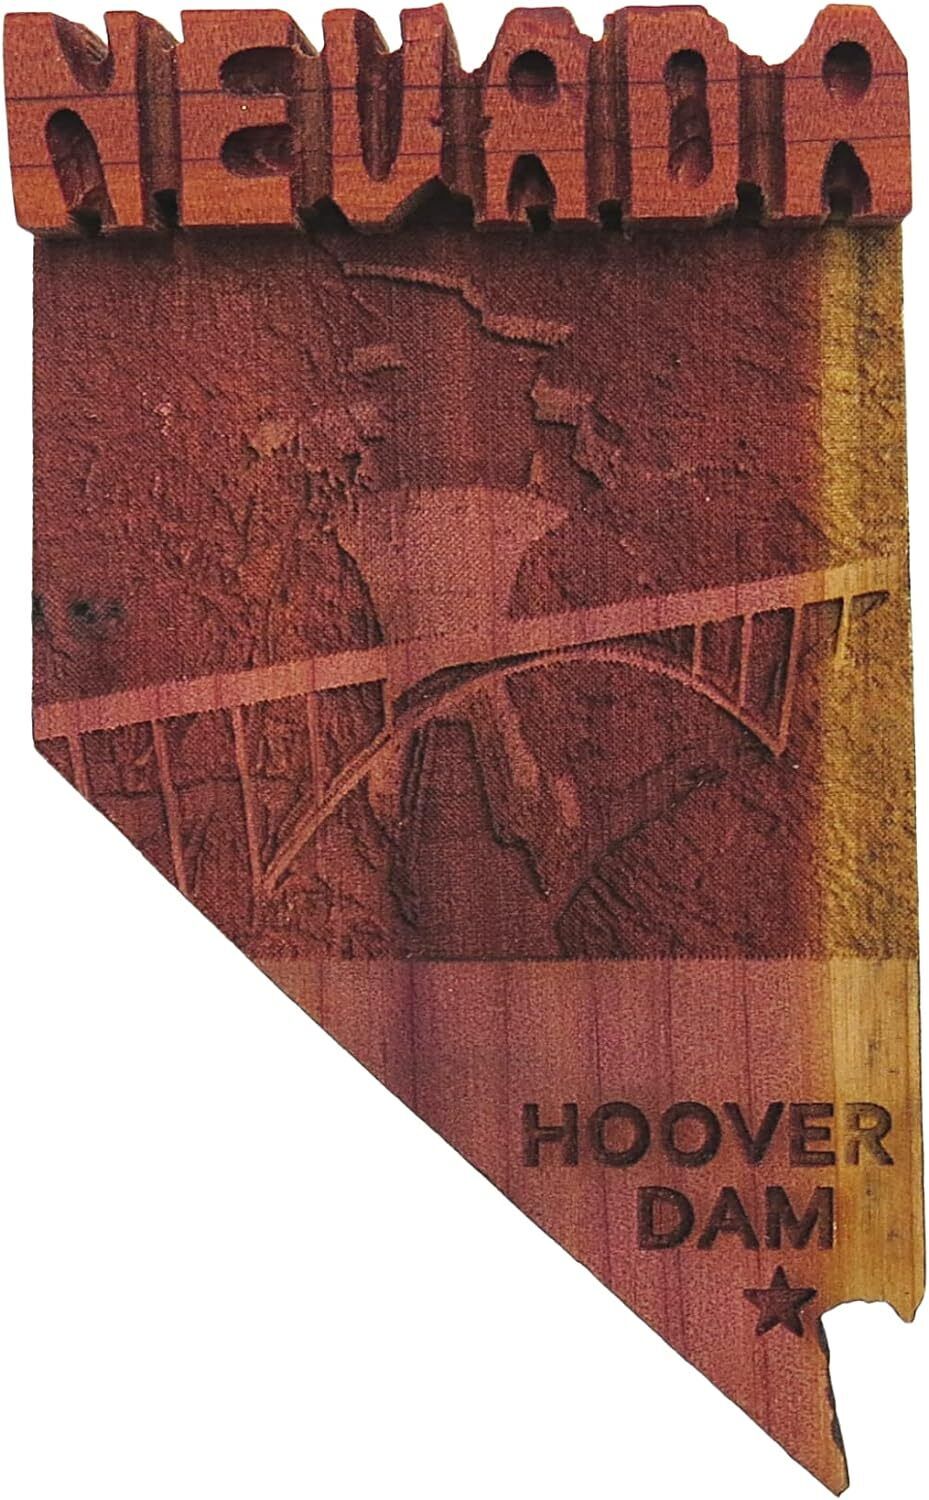 Hover Dam Wooden Magnet Laser Cut Wood Nevada Souvenir Magnets, 3.25 Inches